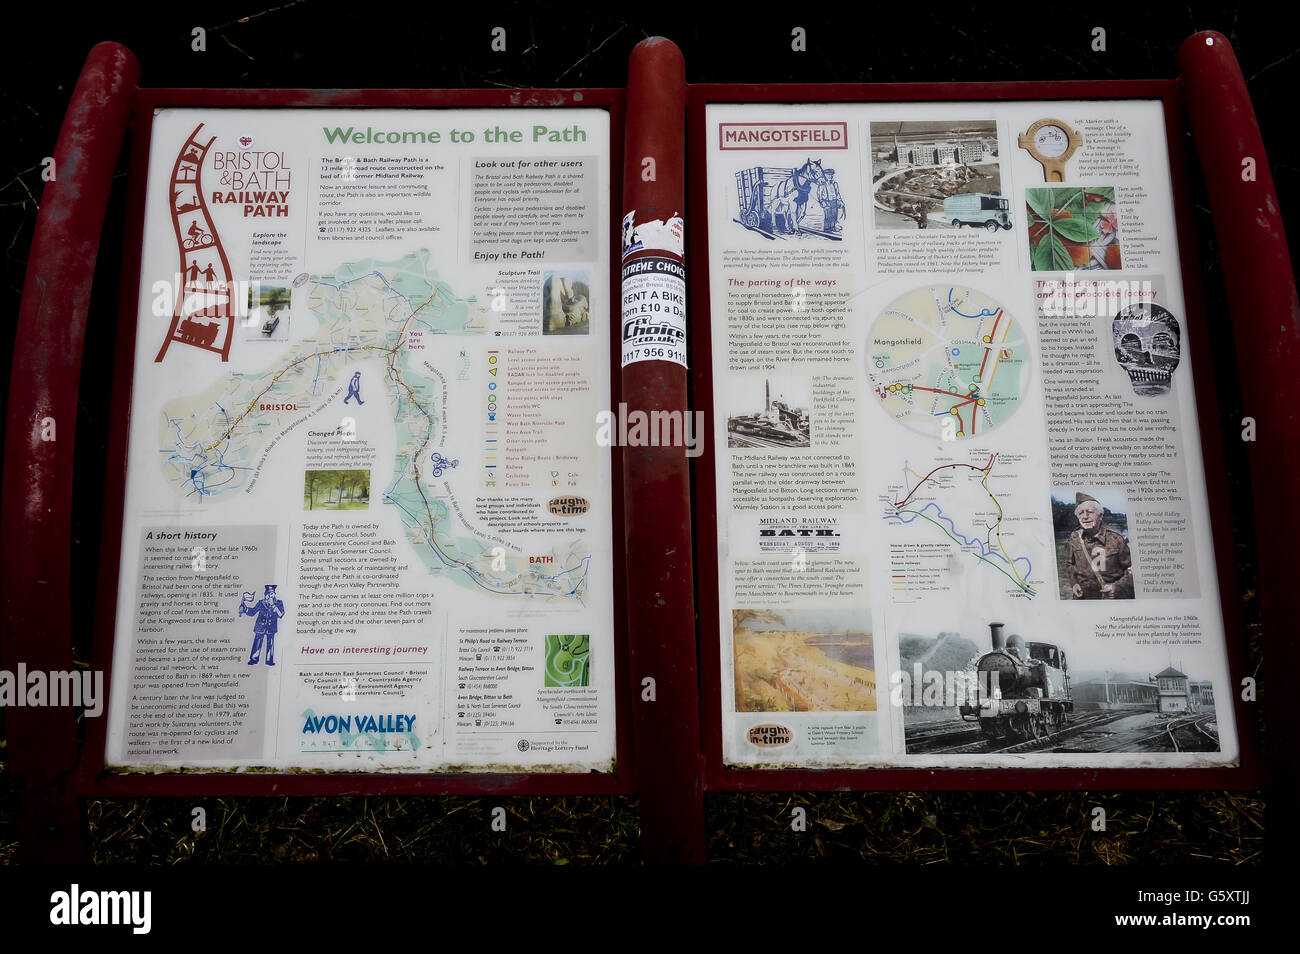 An information board on the Mangotsfield section on the Bristol & Bath railway path. The Bristol & Bath Railway Path was constructed on the track bed of the former Midland Railway which closed for passenger traffic at the end of the 1960s. Between 1979 and 1986, the railway line was converted into the Railway Path by cycling charity Sustrans. The first stretch was between Bath and Bitton where the campaign group, Cyclebag obtained planning permission to create the 2m wide dust track. The route then developed westwards with Bristol being the last section. This was tarmaced from the outset. Stock Photo